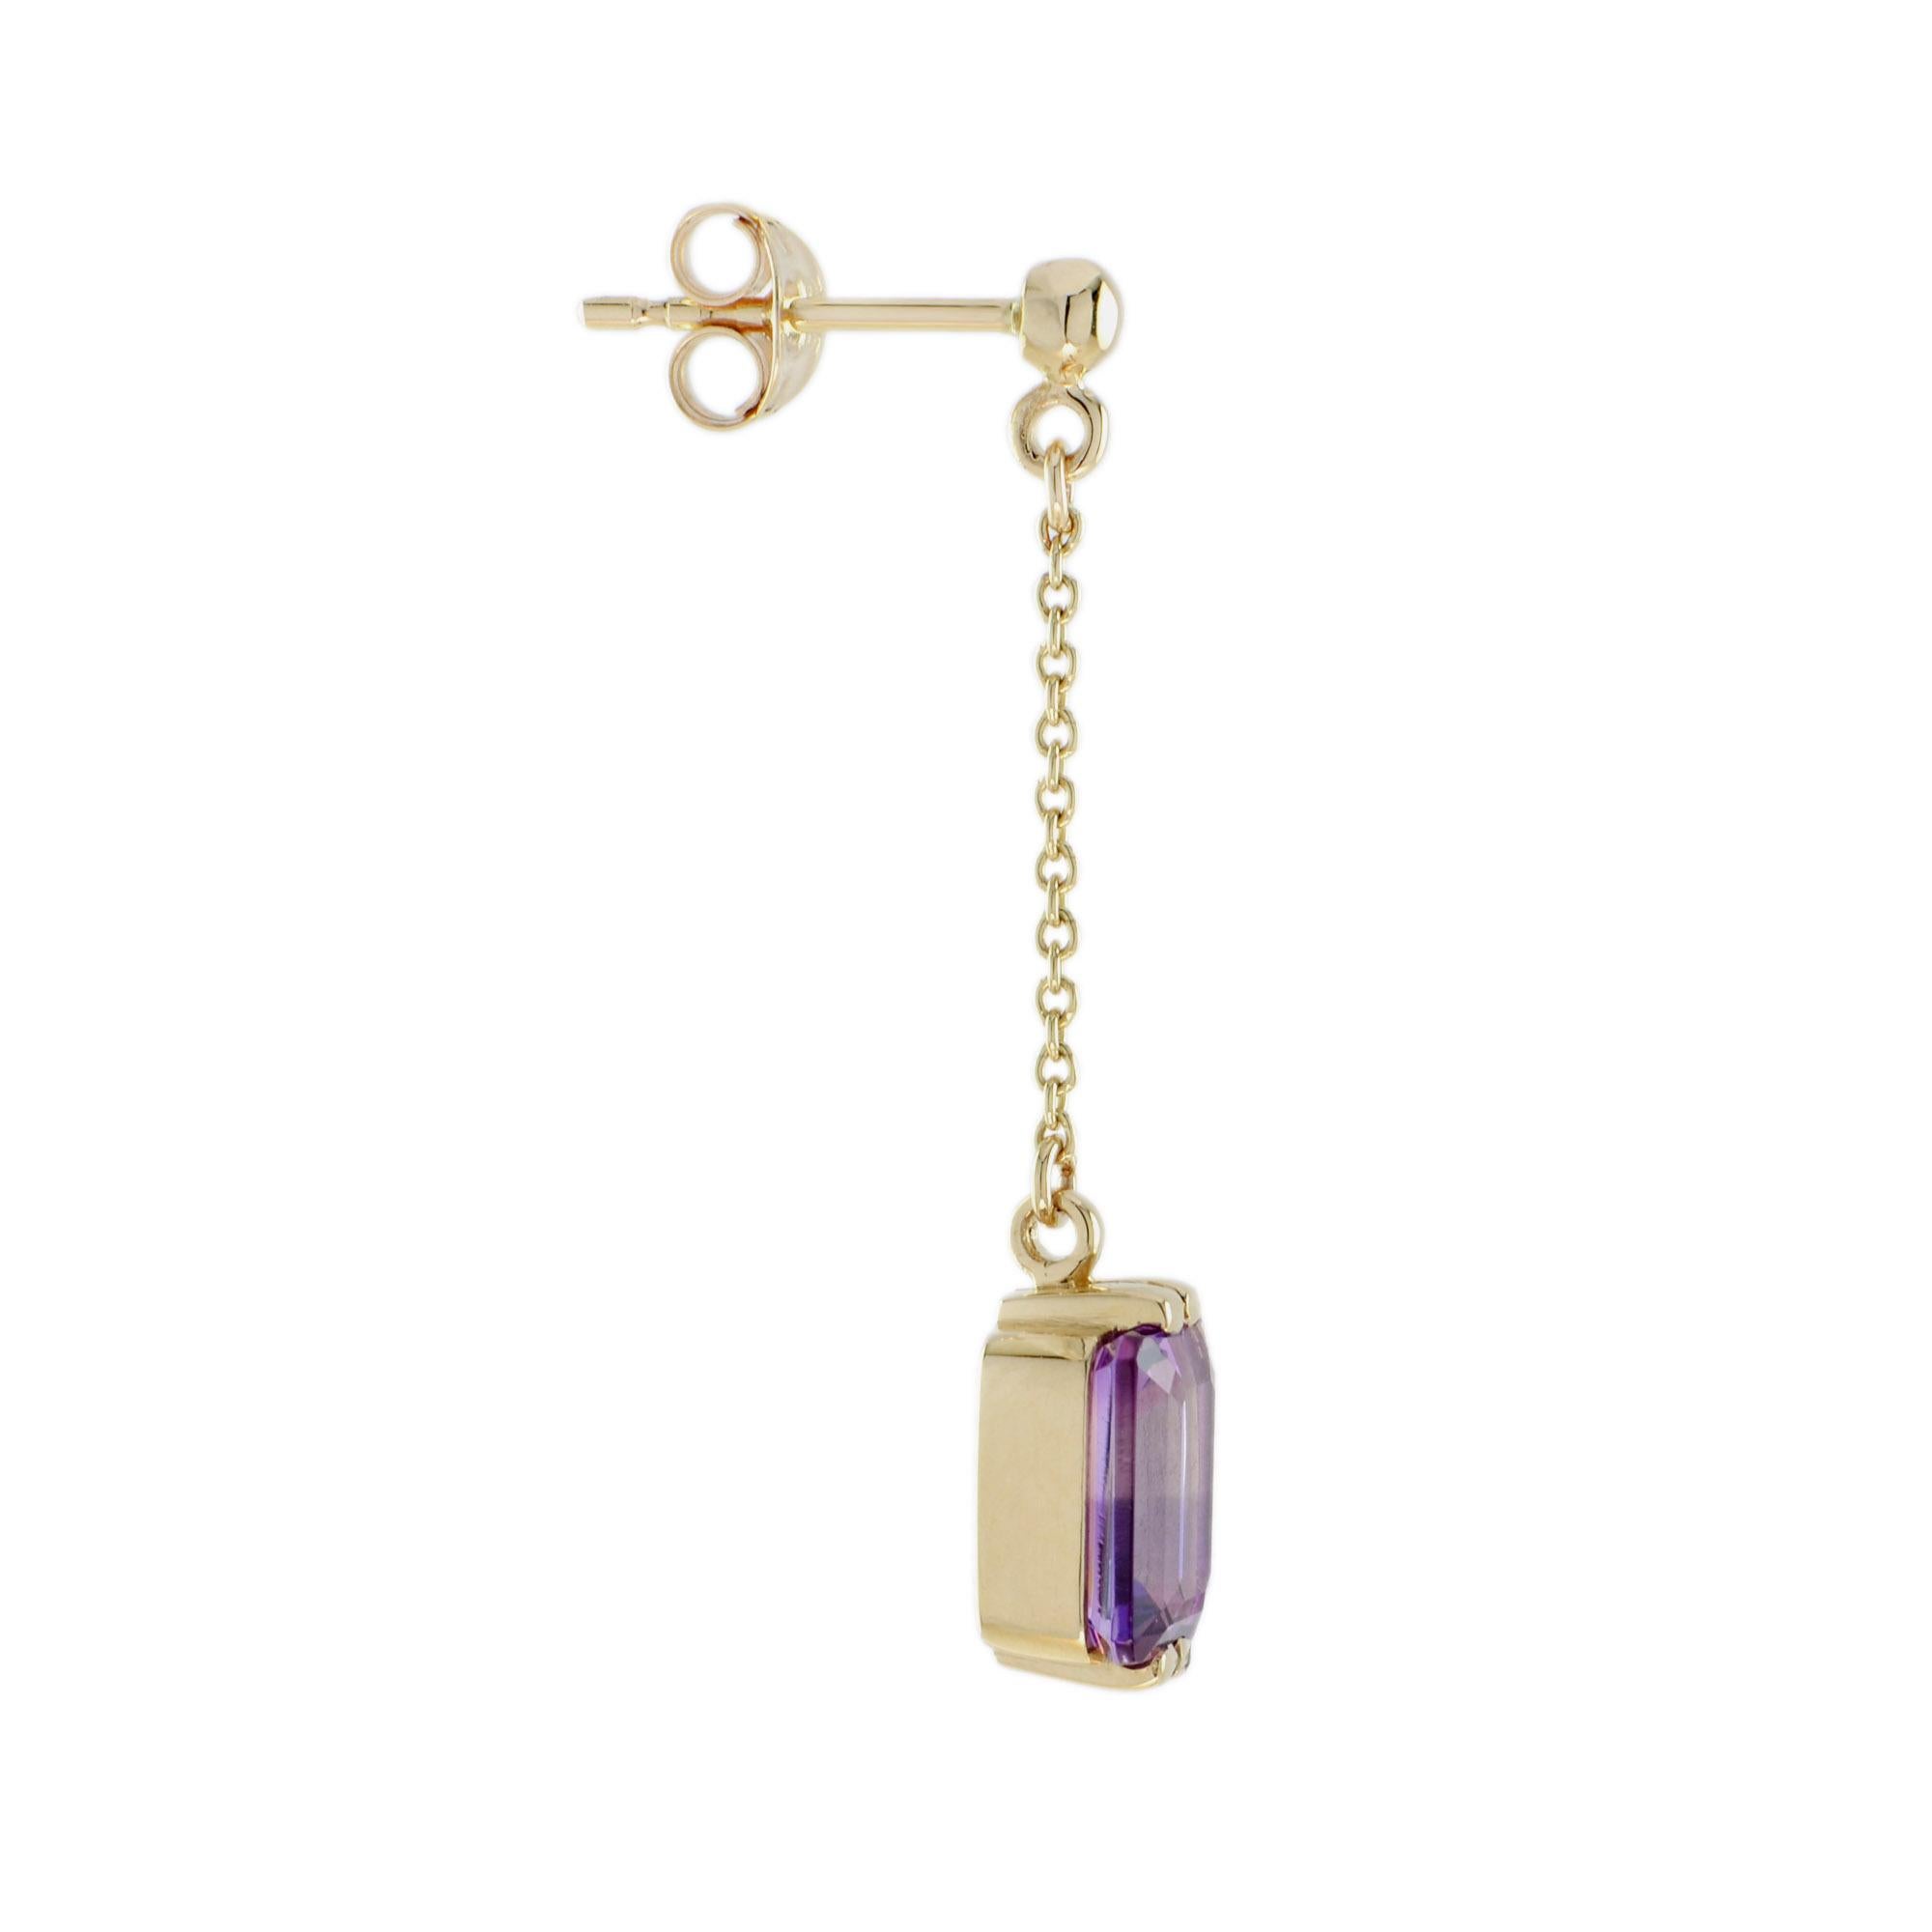 A lovely emerald cut amethyst gemstones cast a chic on these dramatic linear dangle earrings.

Earrings Information
Metal: 9K Yellow Gold
Width: 6 mm.
Length: 33 mm.
Weight: 2.93 g. (approx. in total)
Backing: Push Back

Center Gemstones 
Type: